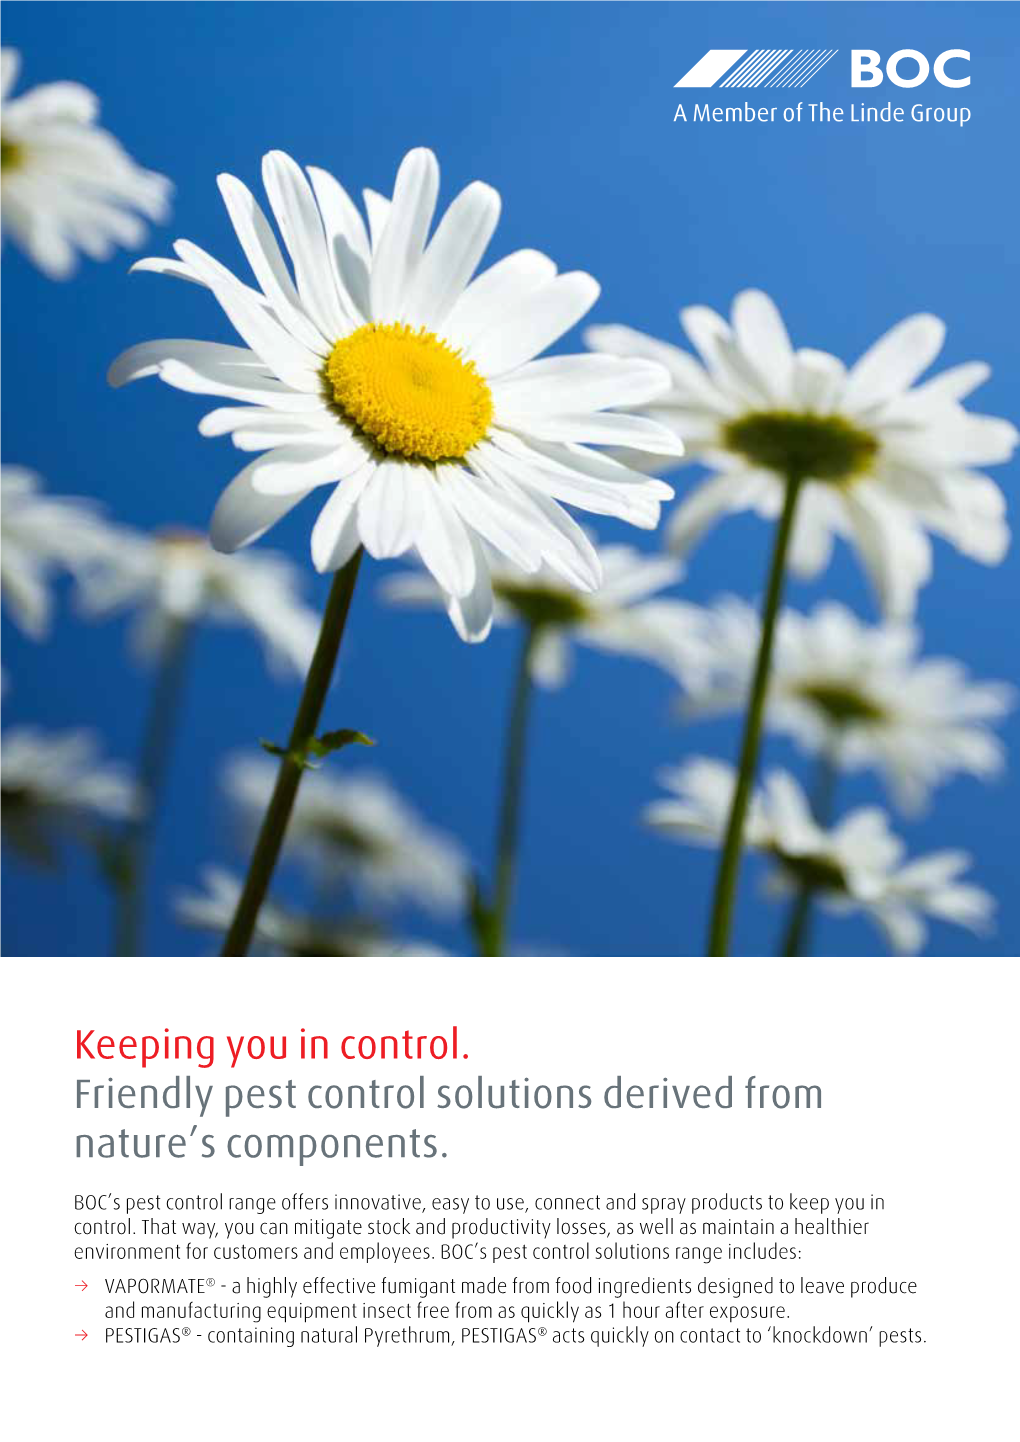 Friendly Pest Control Solutions Derived from Nature's Components